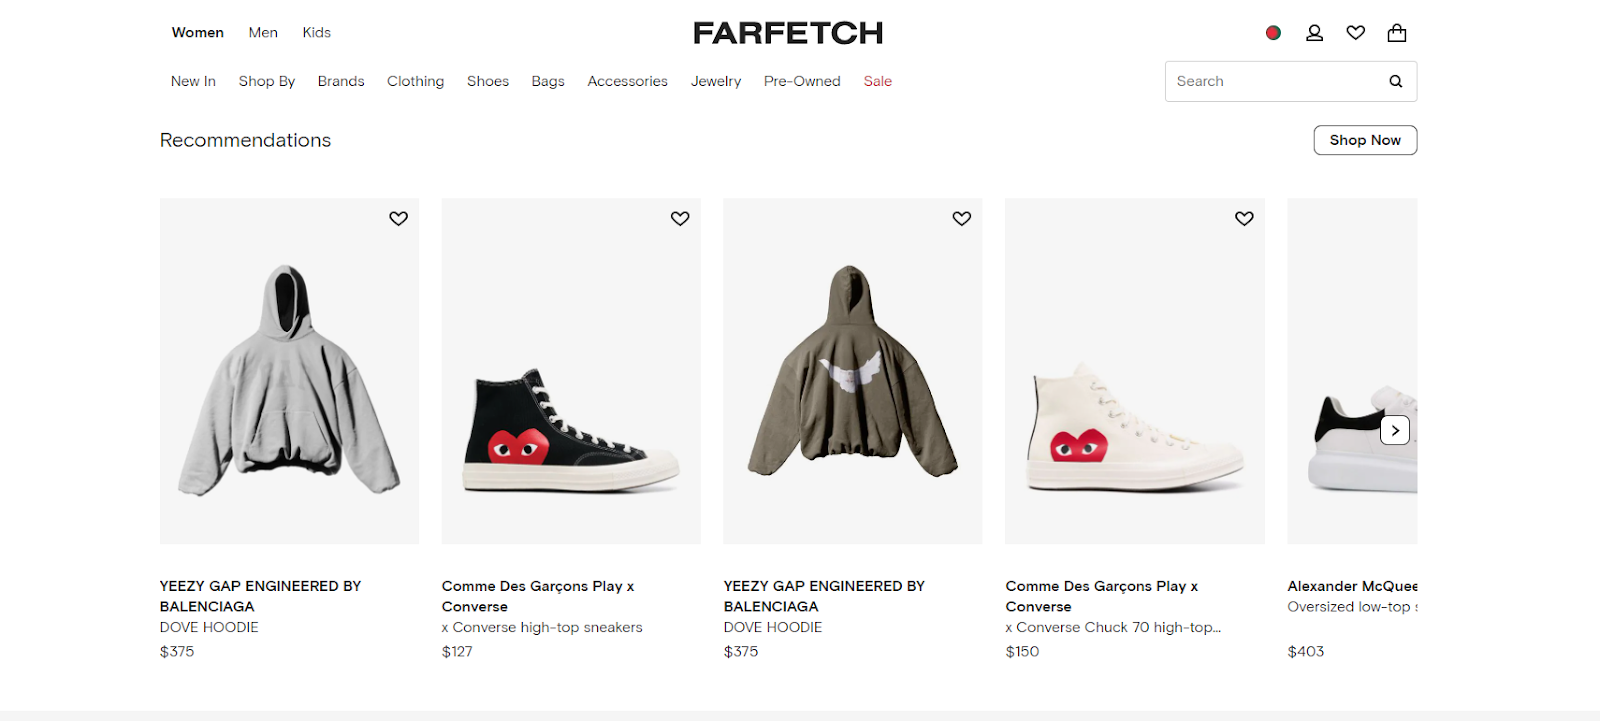 FARFETCH : Read This Before You Buy Something-Cloud Retouch